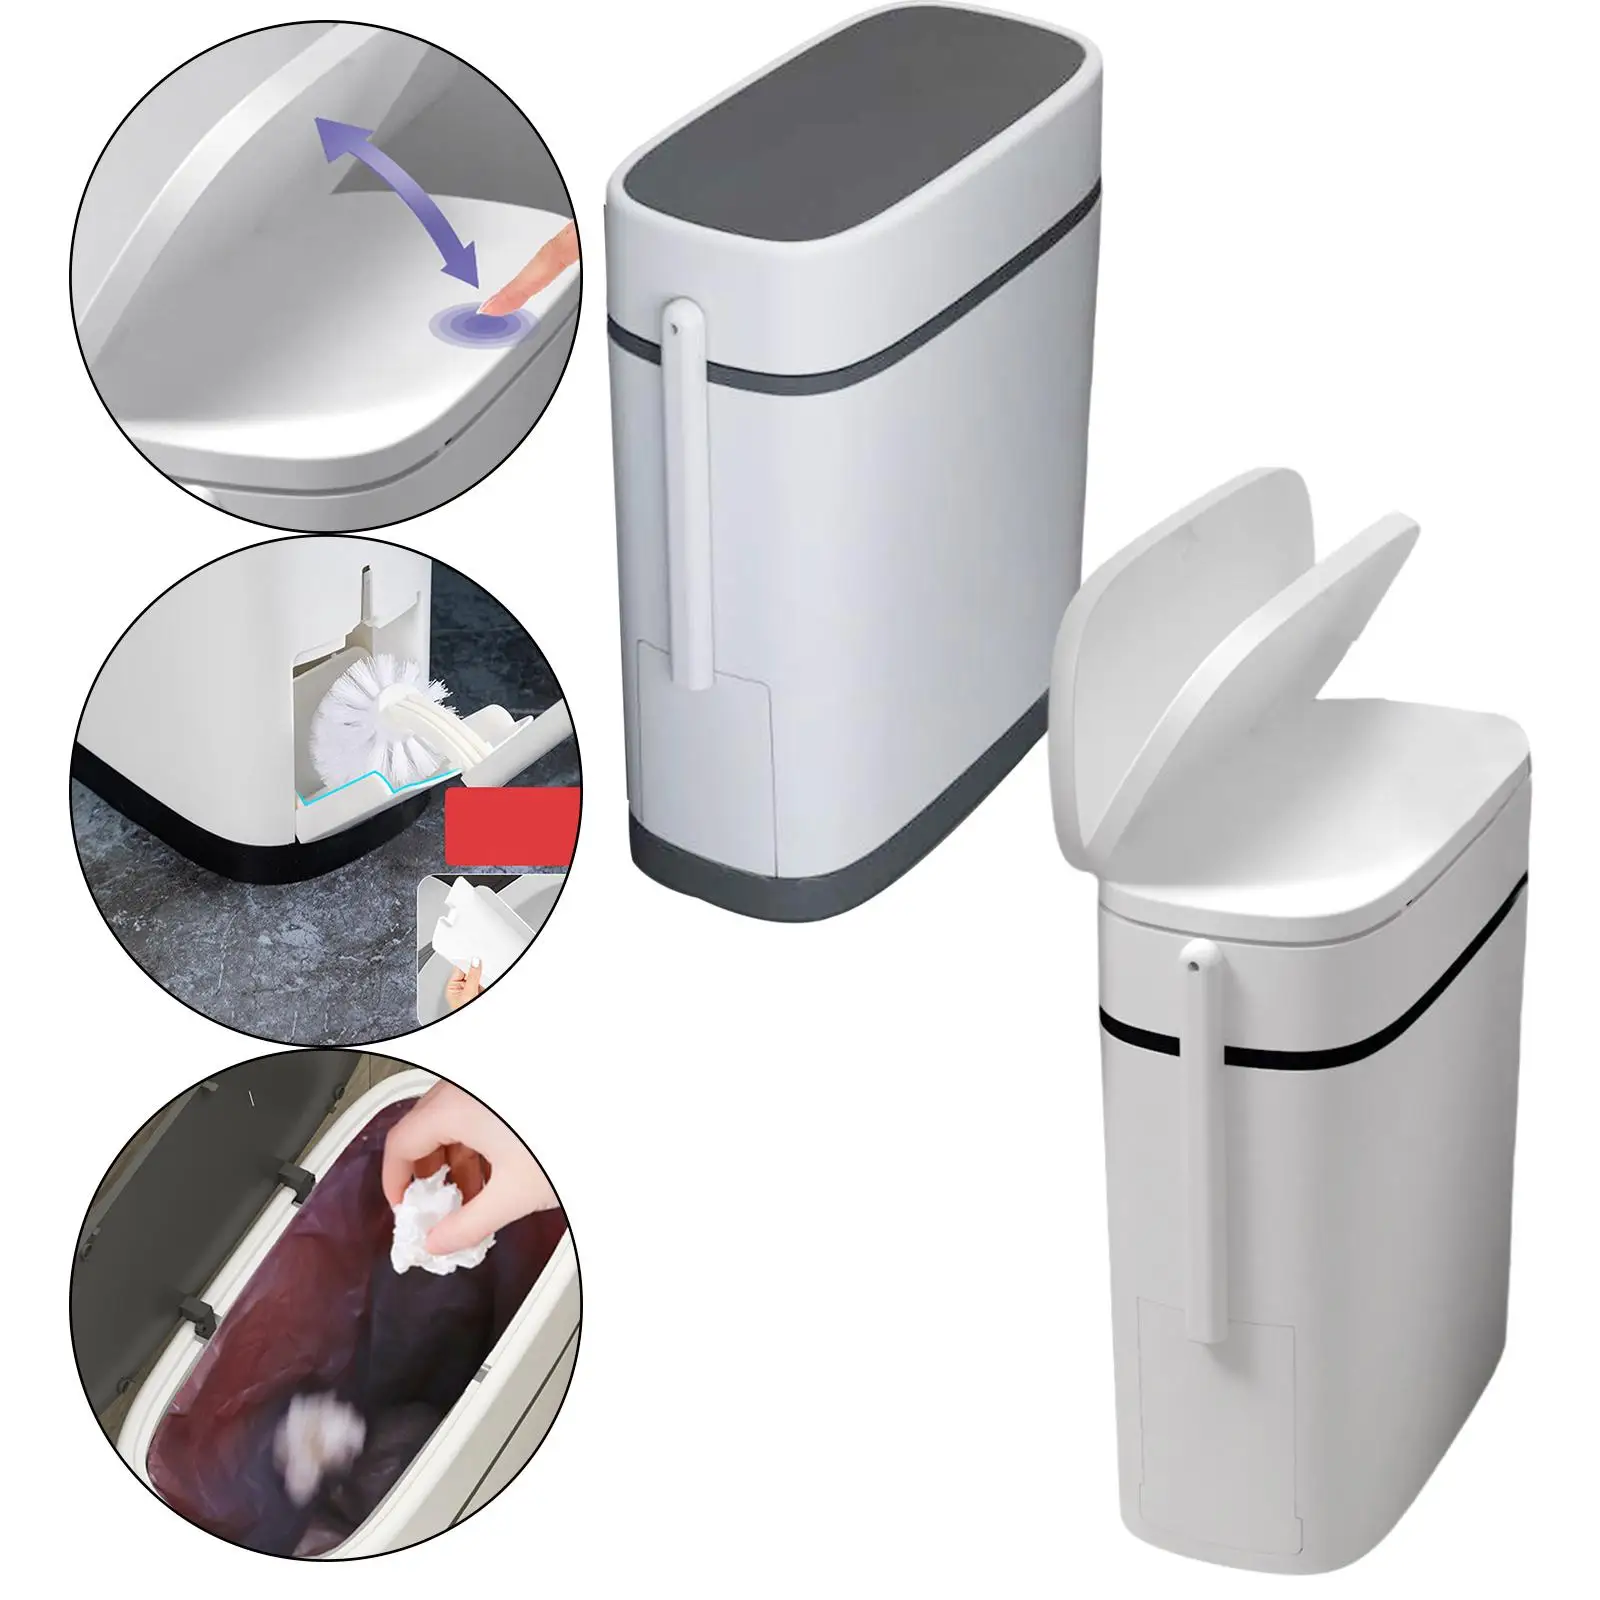 Narrow Trash Can with Toilet Brush Dustbin Bucket for Bathroom Bedroom Living room and home RV